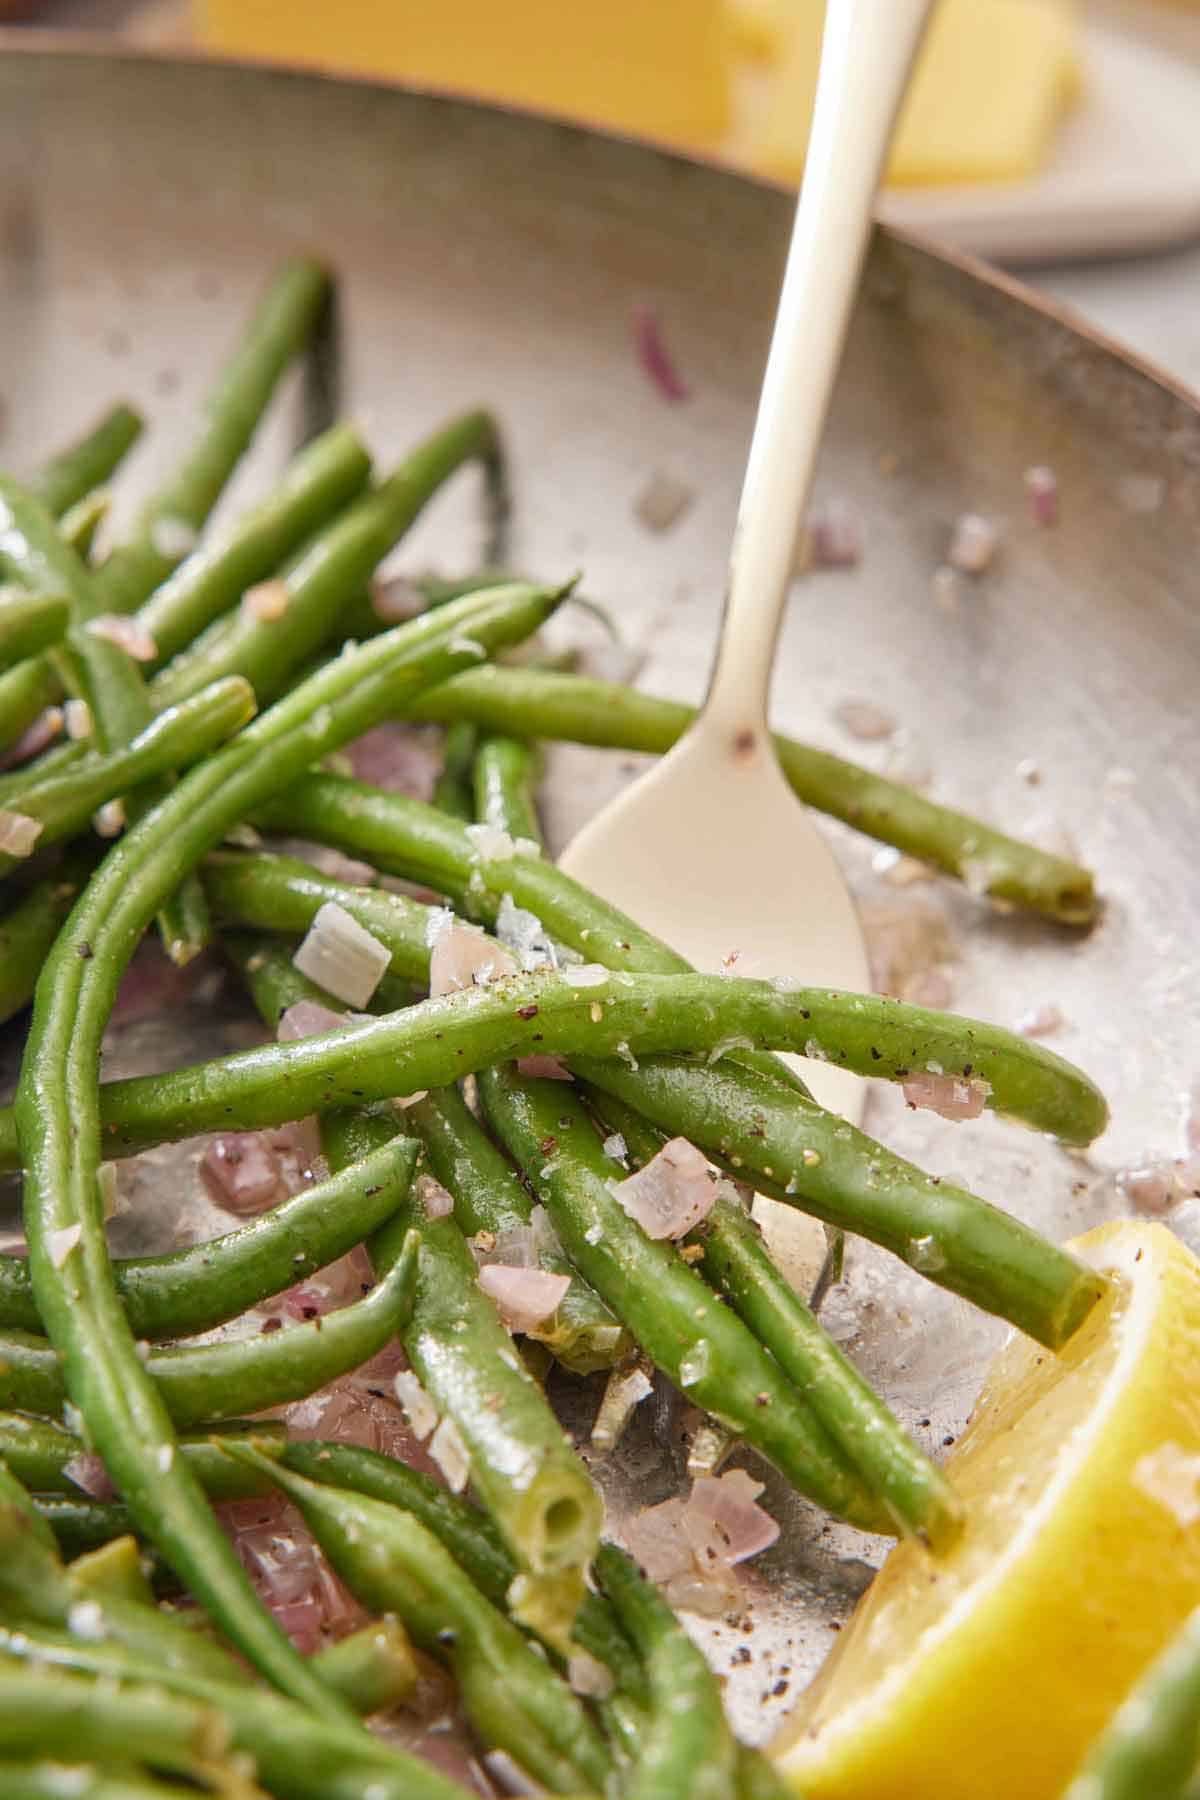 A skillet of French green beans with a fork underneath with a wedge of lemon beside it.